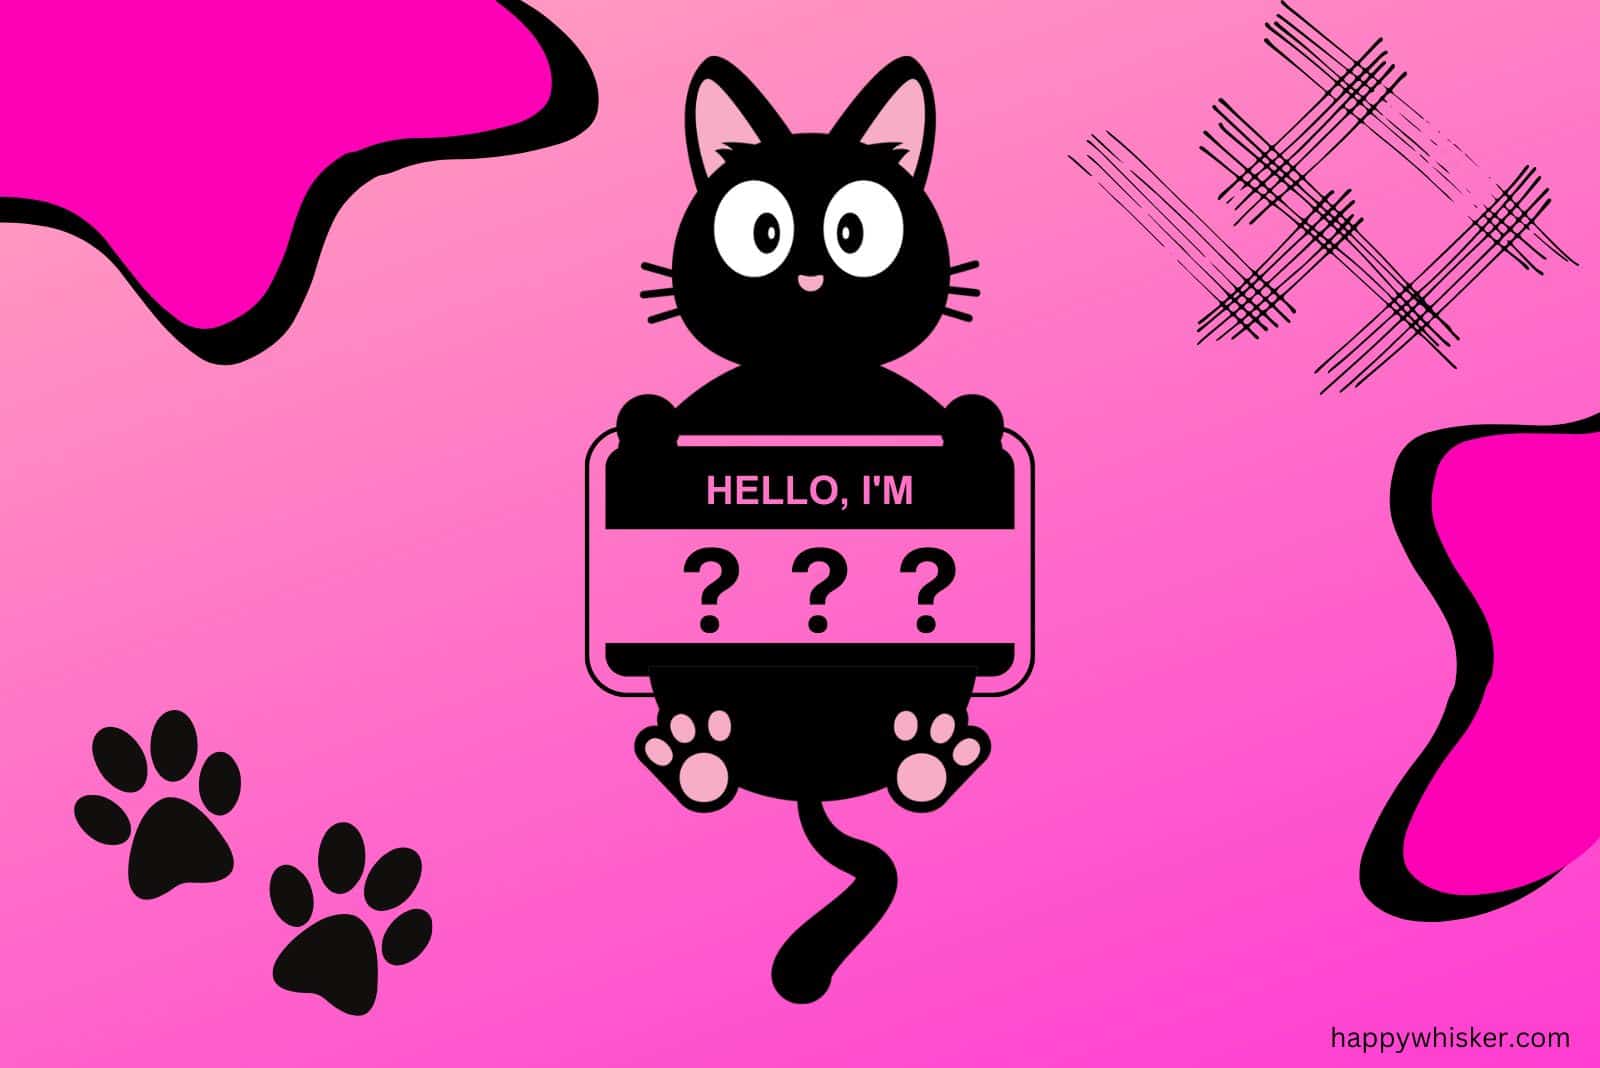 black cat holding a board with pink background